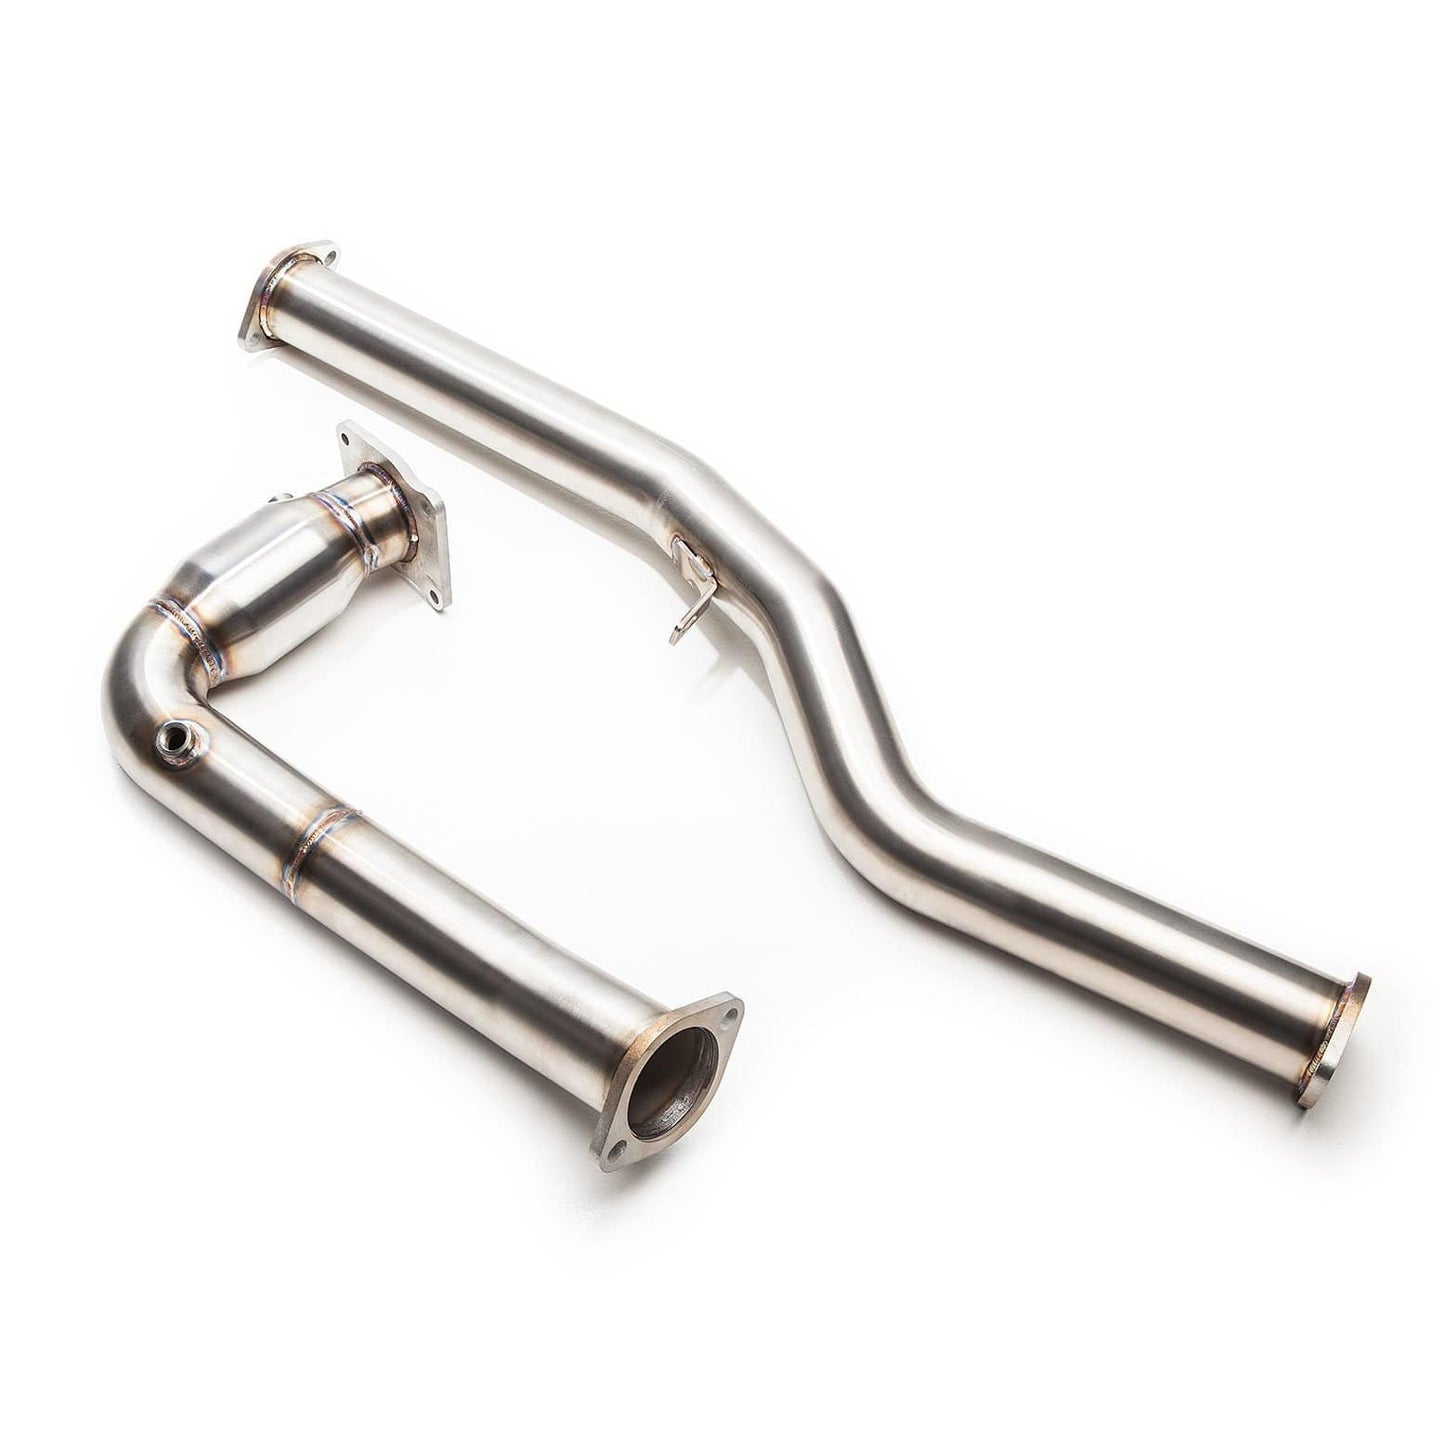 Cobb Stage 2 Power Package w/ Non-Resonated J-Pipe Subaru WRX 2015-2021 6MT | 641X12